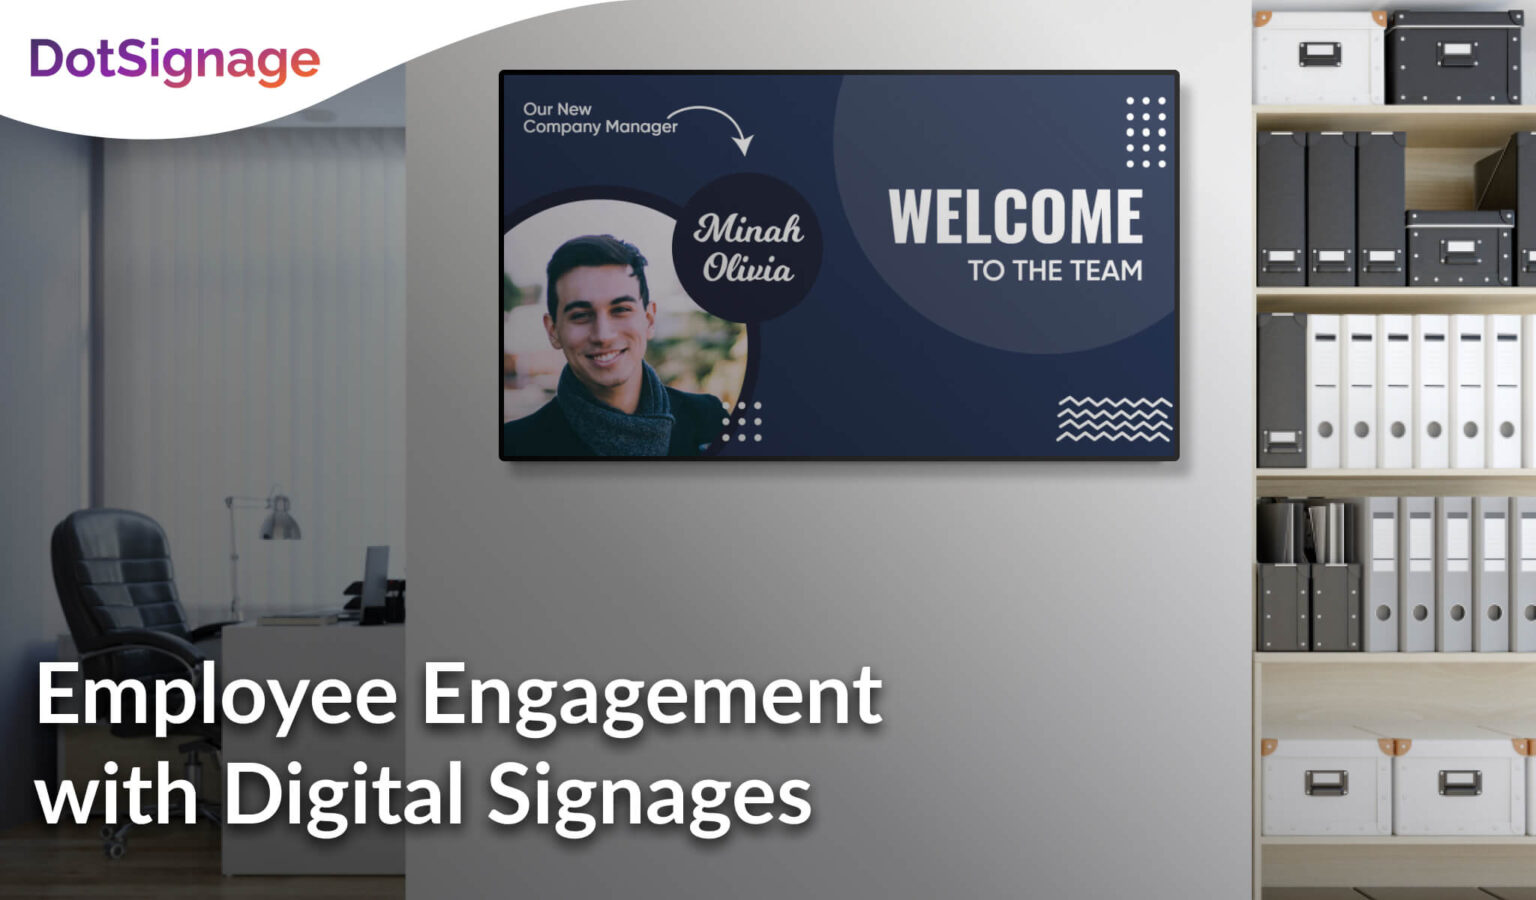 employee engagement using digital signage in office